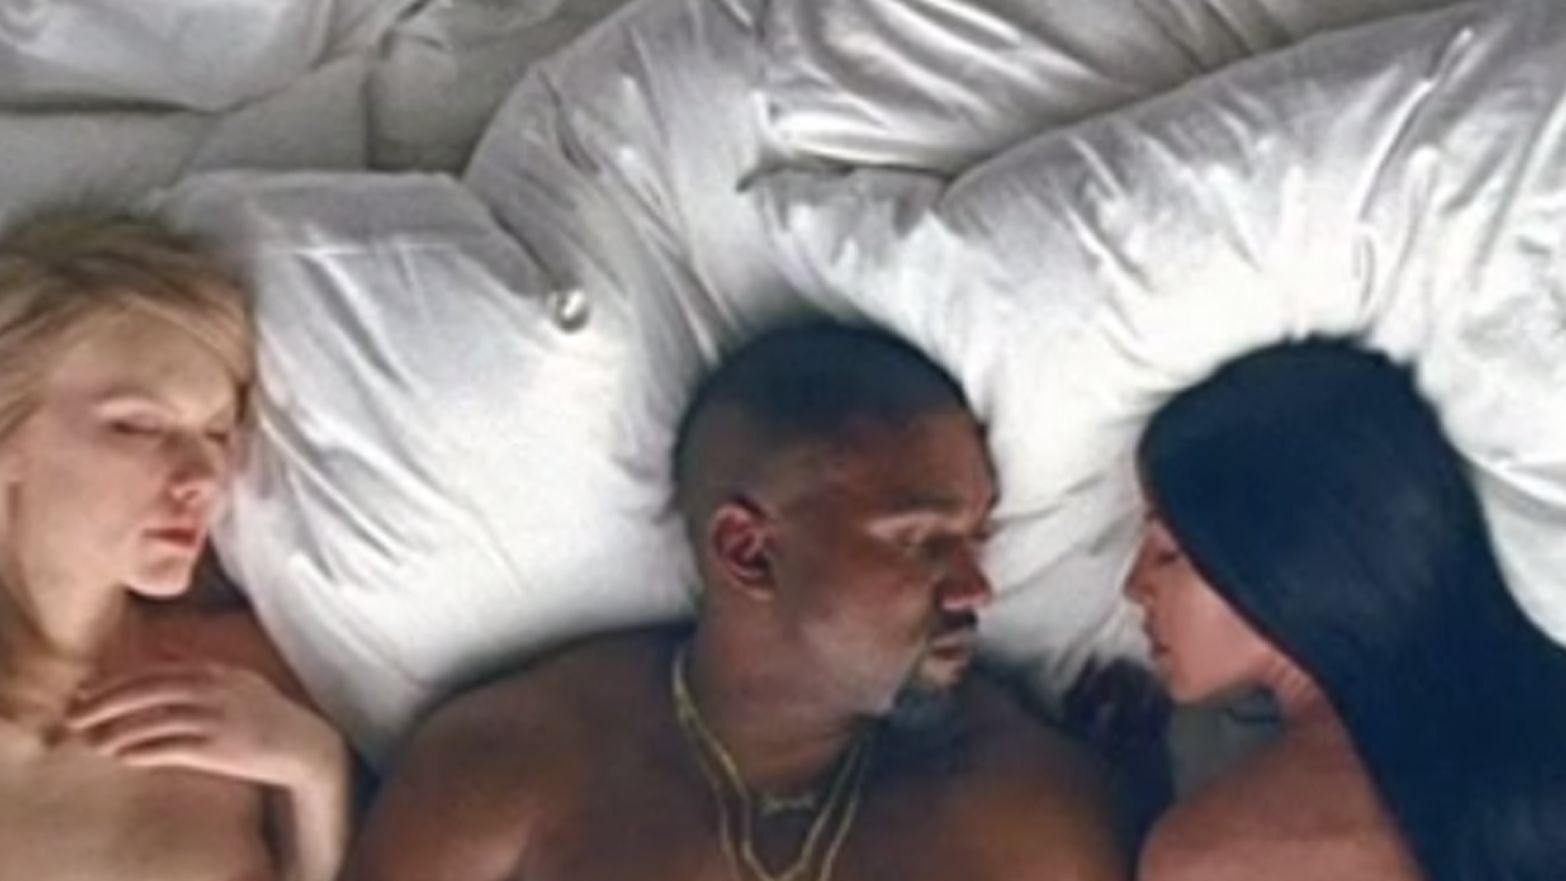 In Kanye West's new video for "Famous," he appears in bed with likenesses of several celebrities, including Taylor Swift, left, and Kim Kardashian, West's wife.